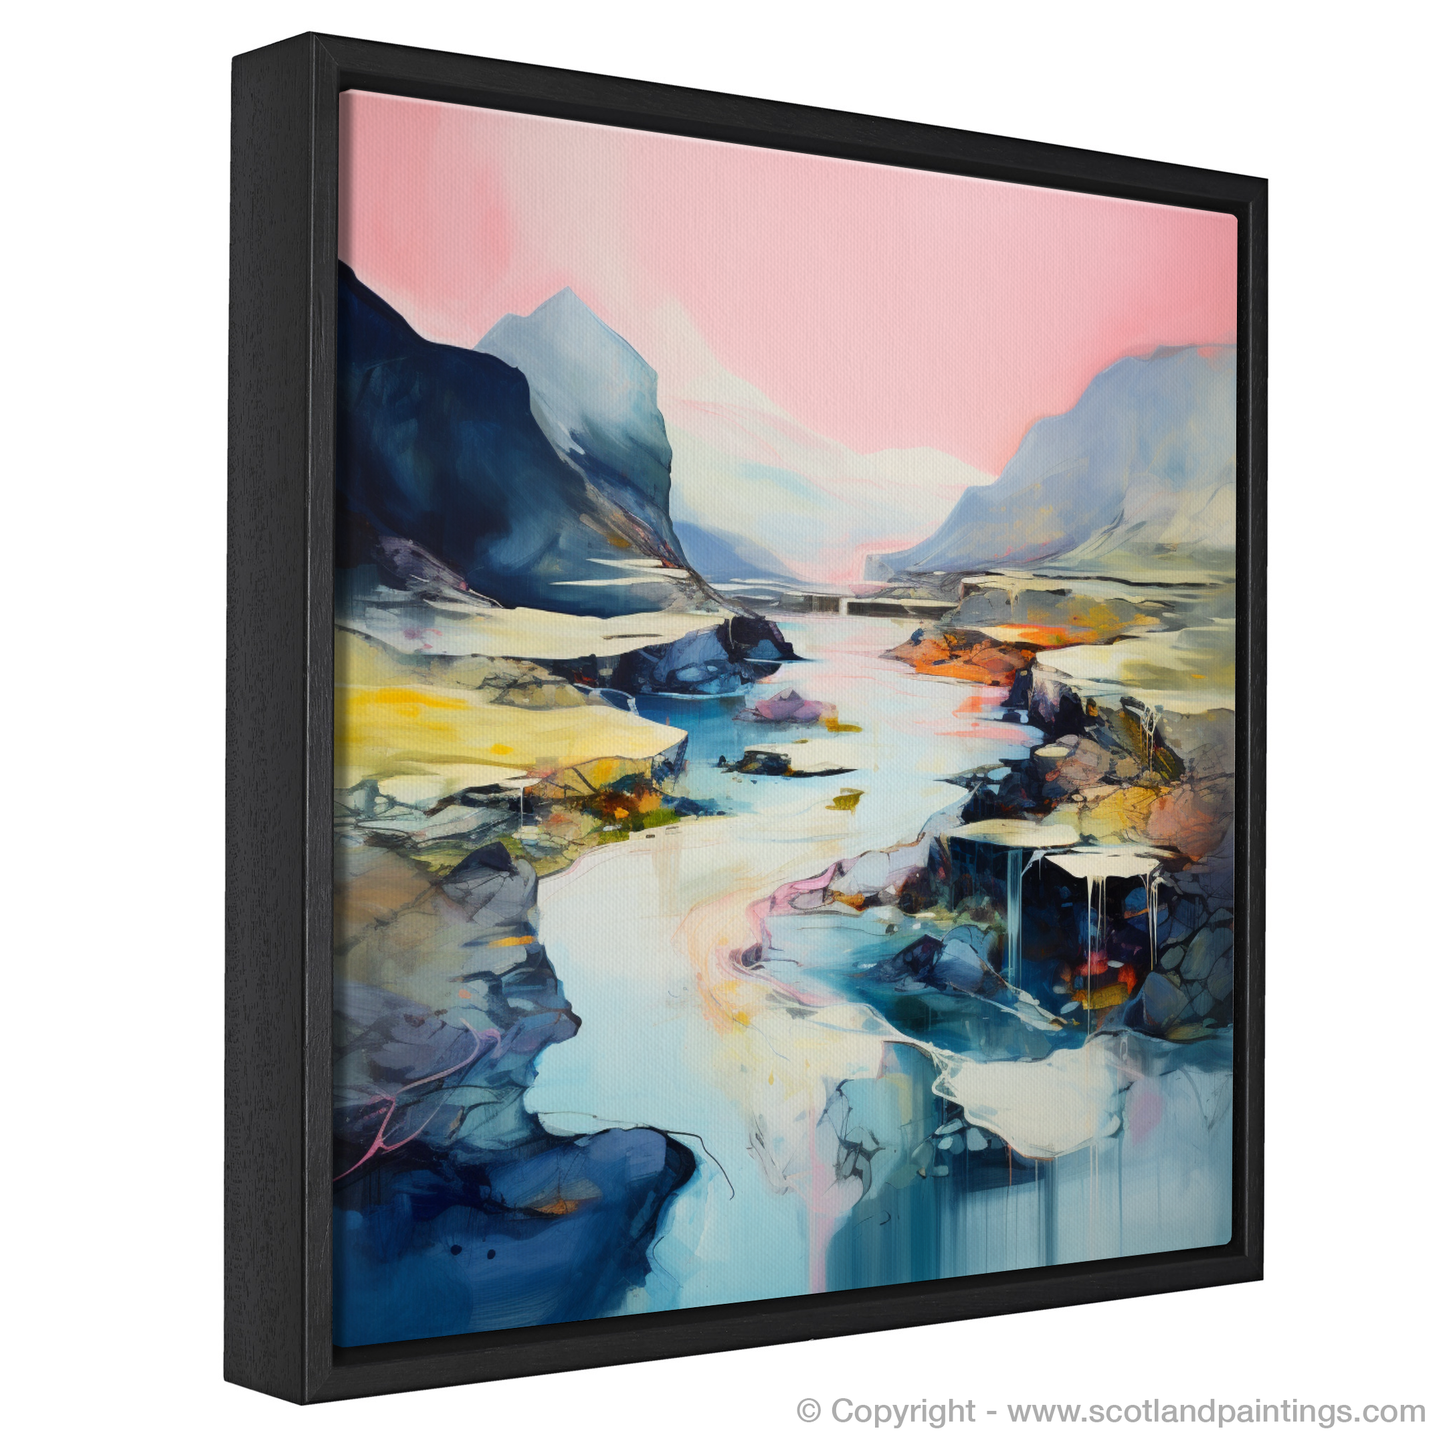 Painting and Art Print of Isle of Skye Fairy Pools at dusk in summer entitled "Ethereal Twilight at Isle of Skye Fairy Pools".